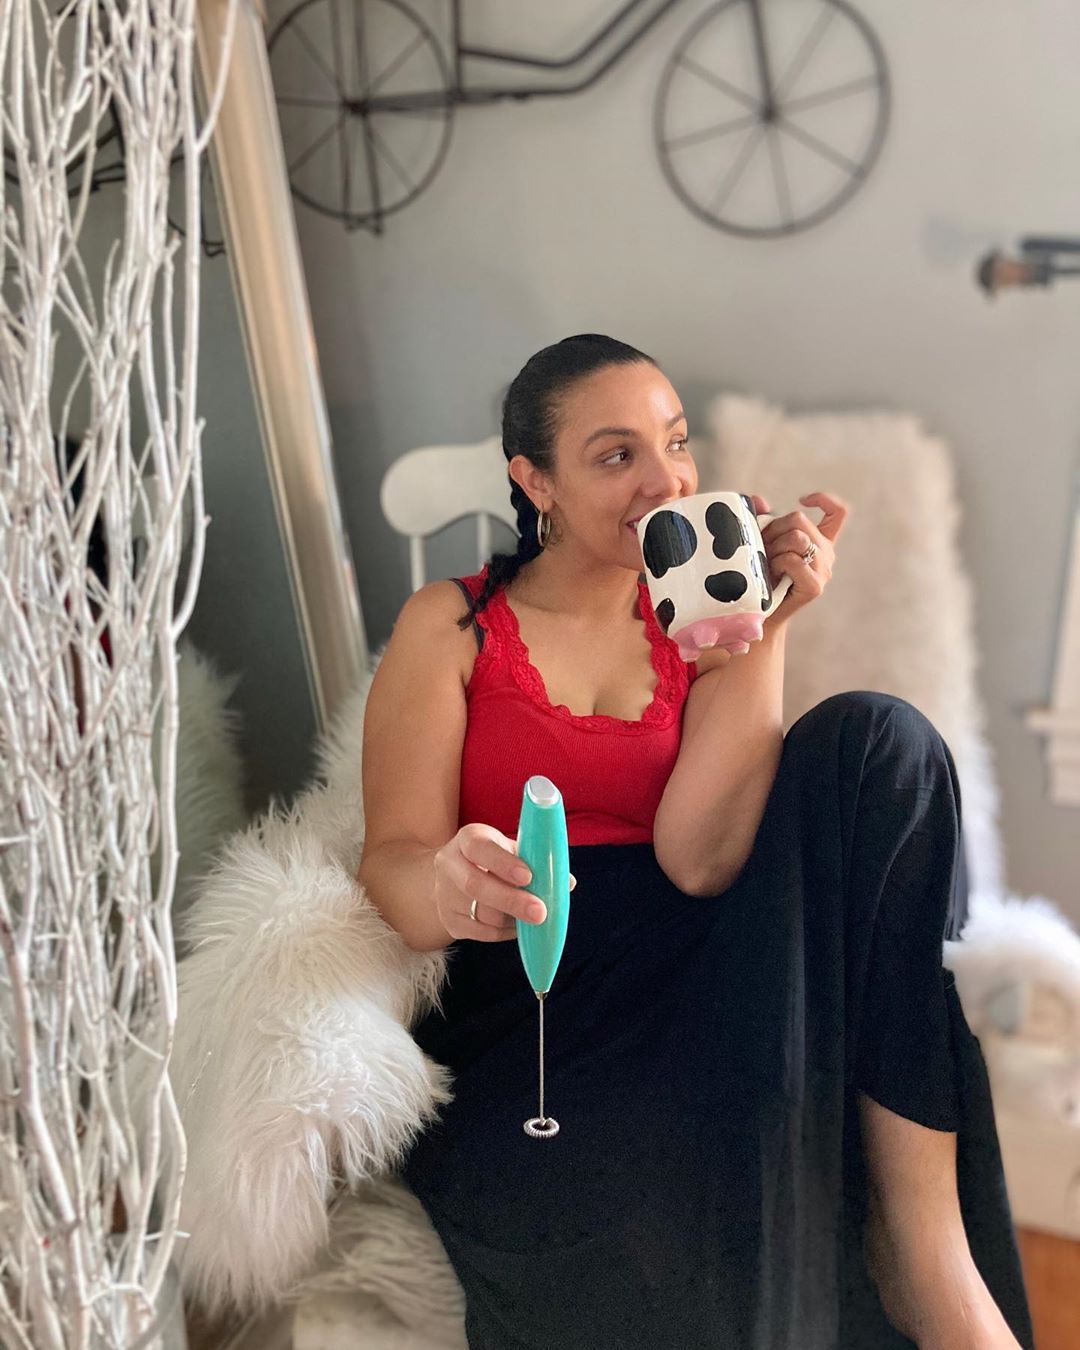 Cristy Uses The MilkBoss Milk Frother To Make Her Favorite Low Carb Coffee! - Zulay Kitchen